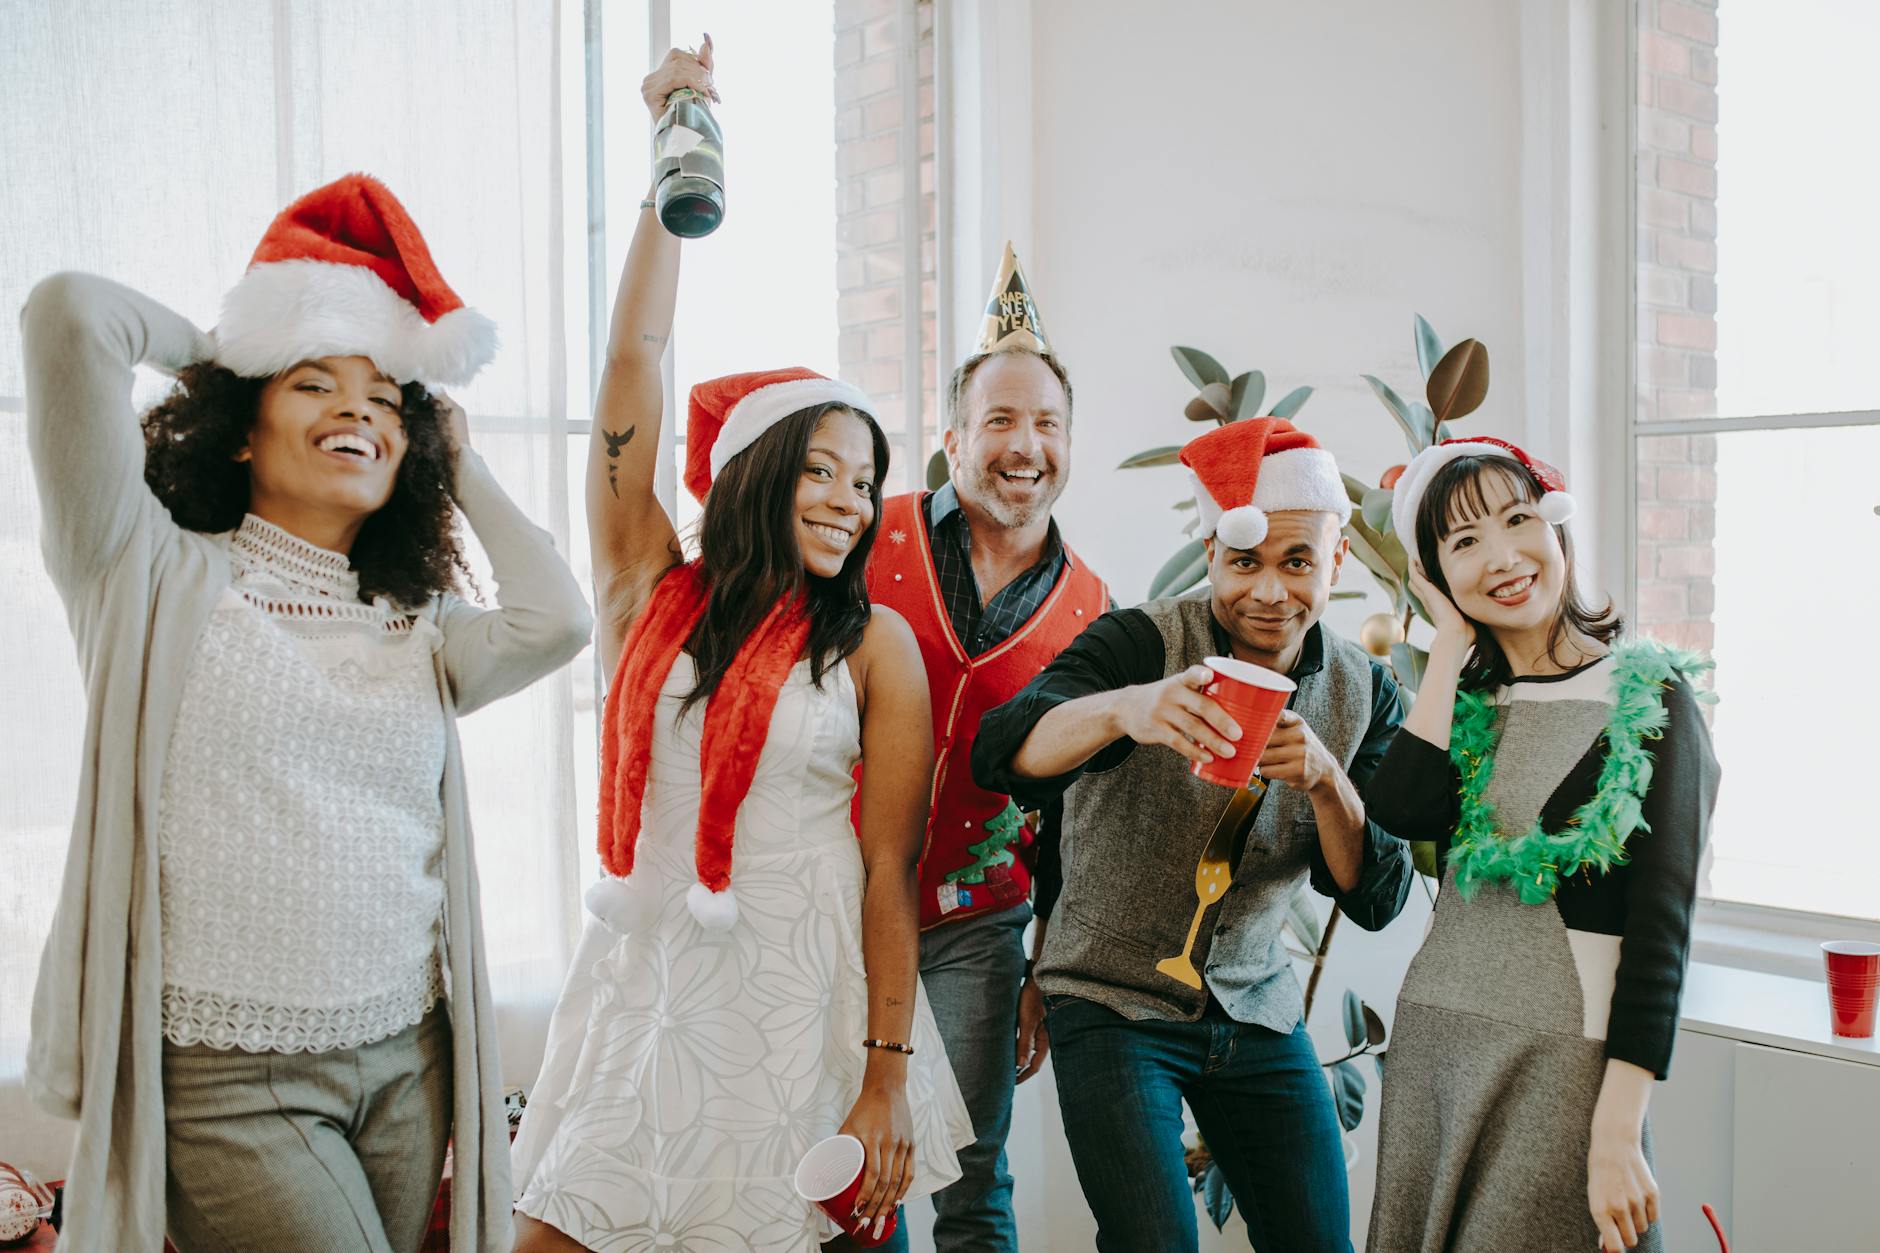 A group of people at an office party wearing various fun holiday accessories